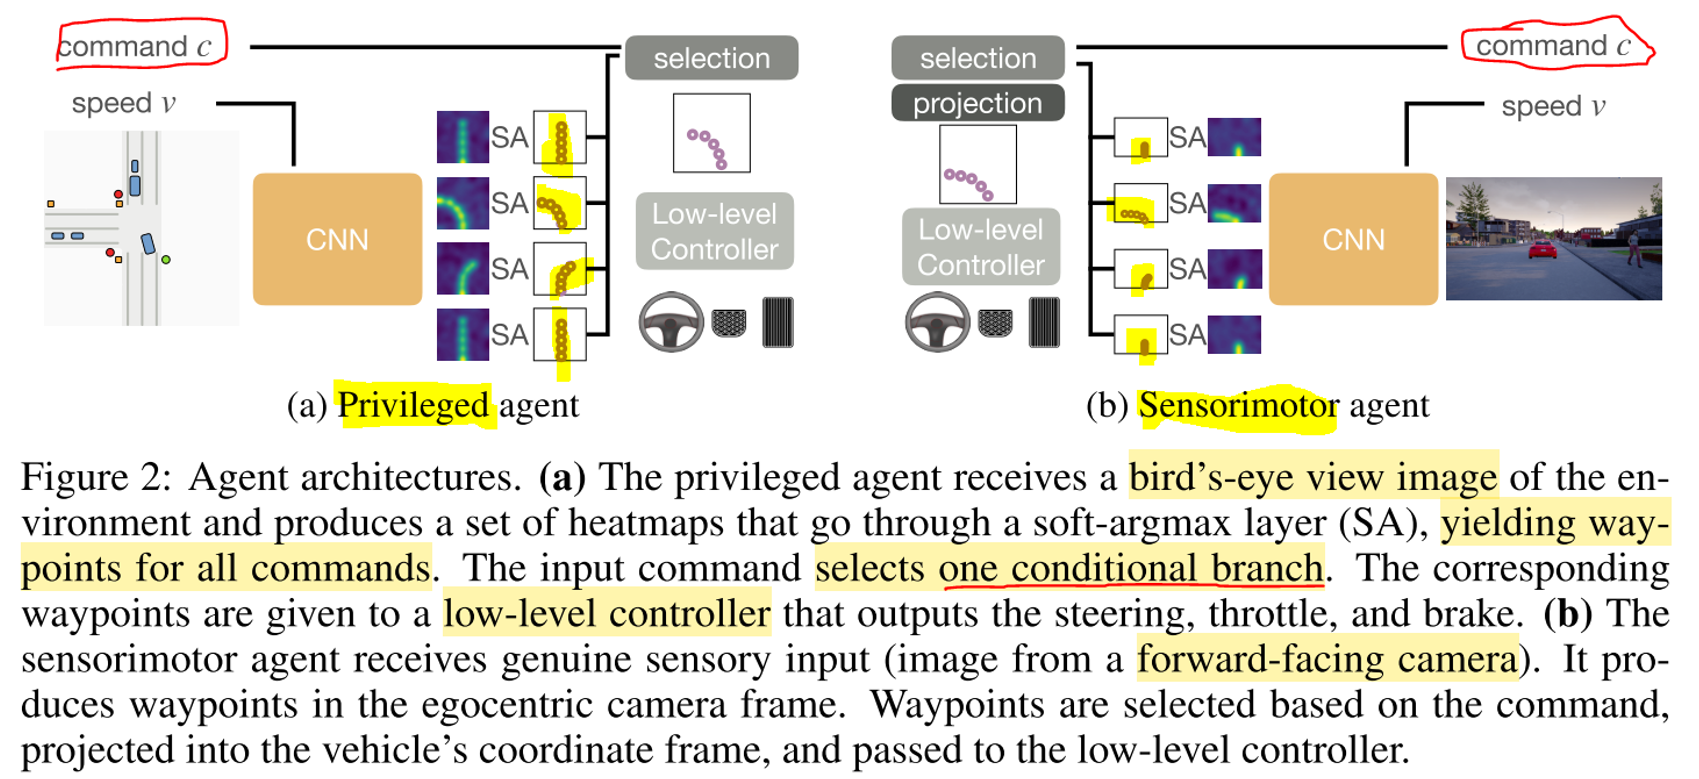 mid-to-mid learning: Based on a processed bird’s-eye view map, the privileged agent predicts a sequence of waypoints to follow. This desired trajectory is eventually converted into low-level commands by two PID controllers. It is also worth noting how this privileged agent serves as an oracle that provides adaptive on-demand supervision to train the sensorimotor agent across all possible commands. Source.